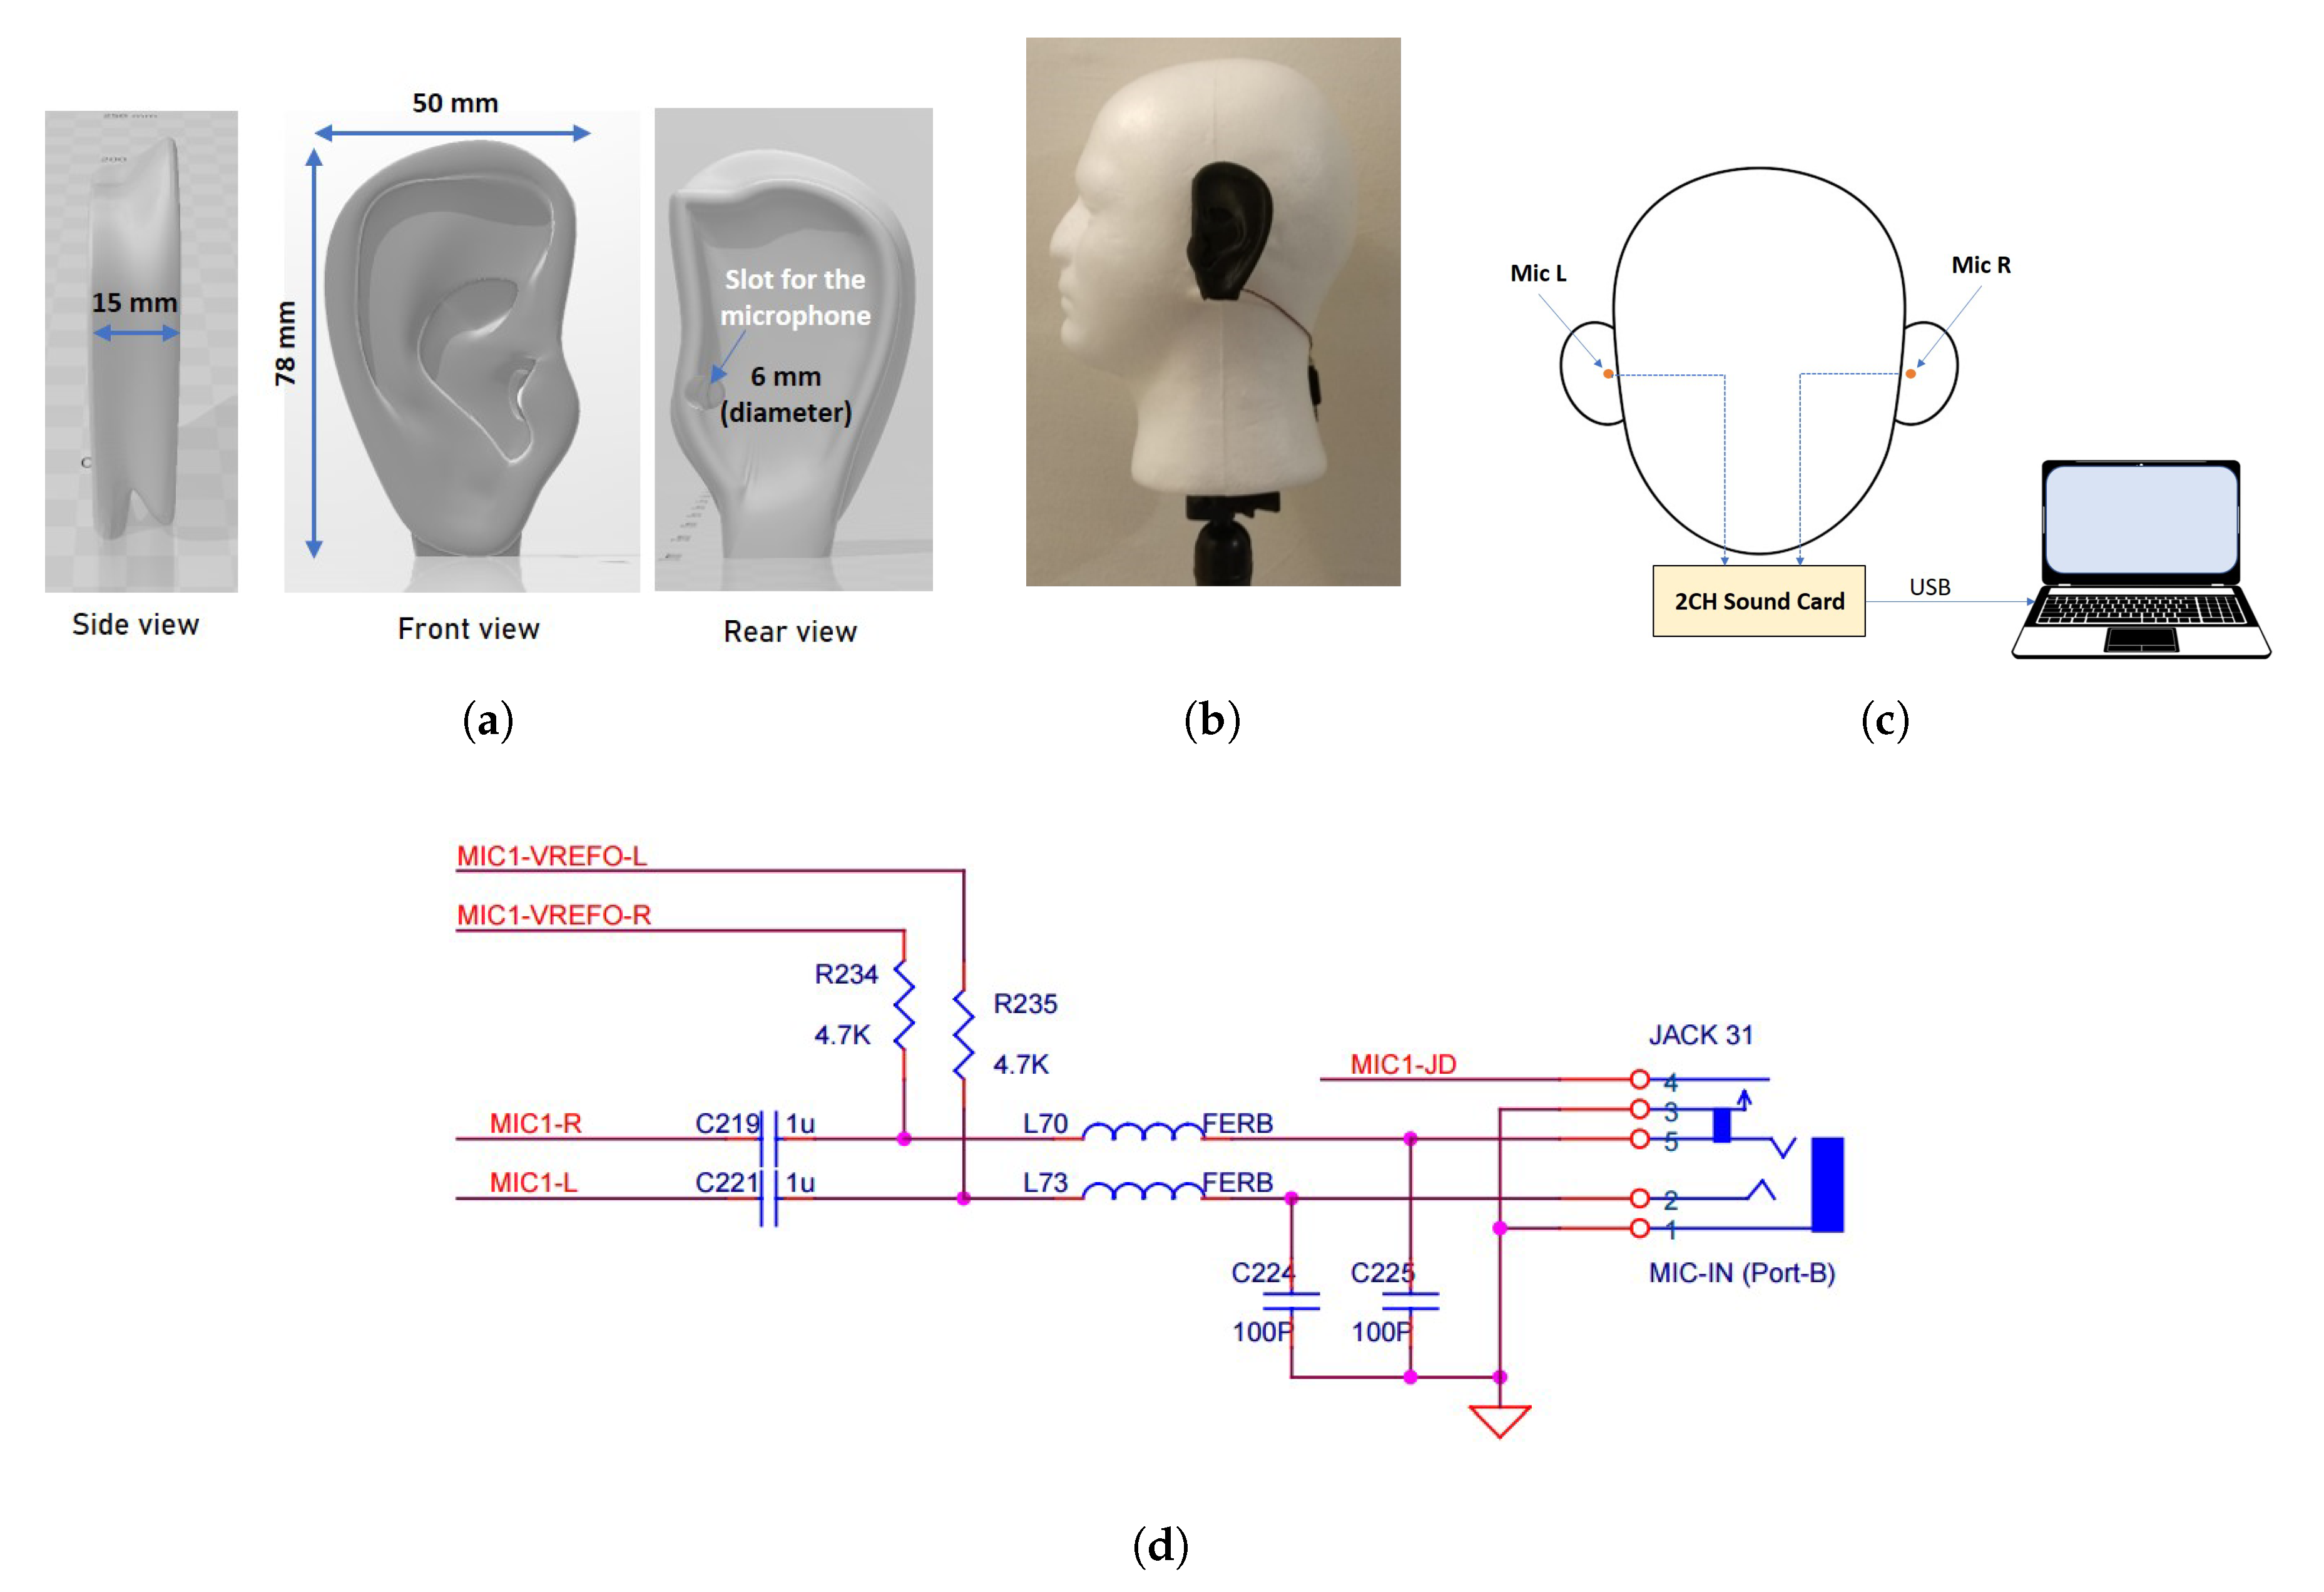 Sensors Free Full Text Binaural Modelling And Spatial Auditory Cue Analysis Of 3d Printed Ears Html